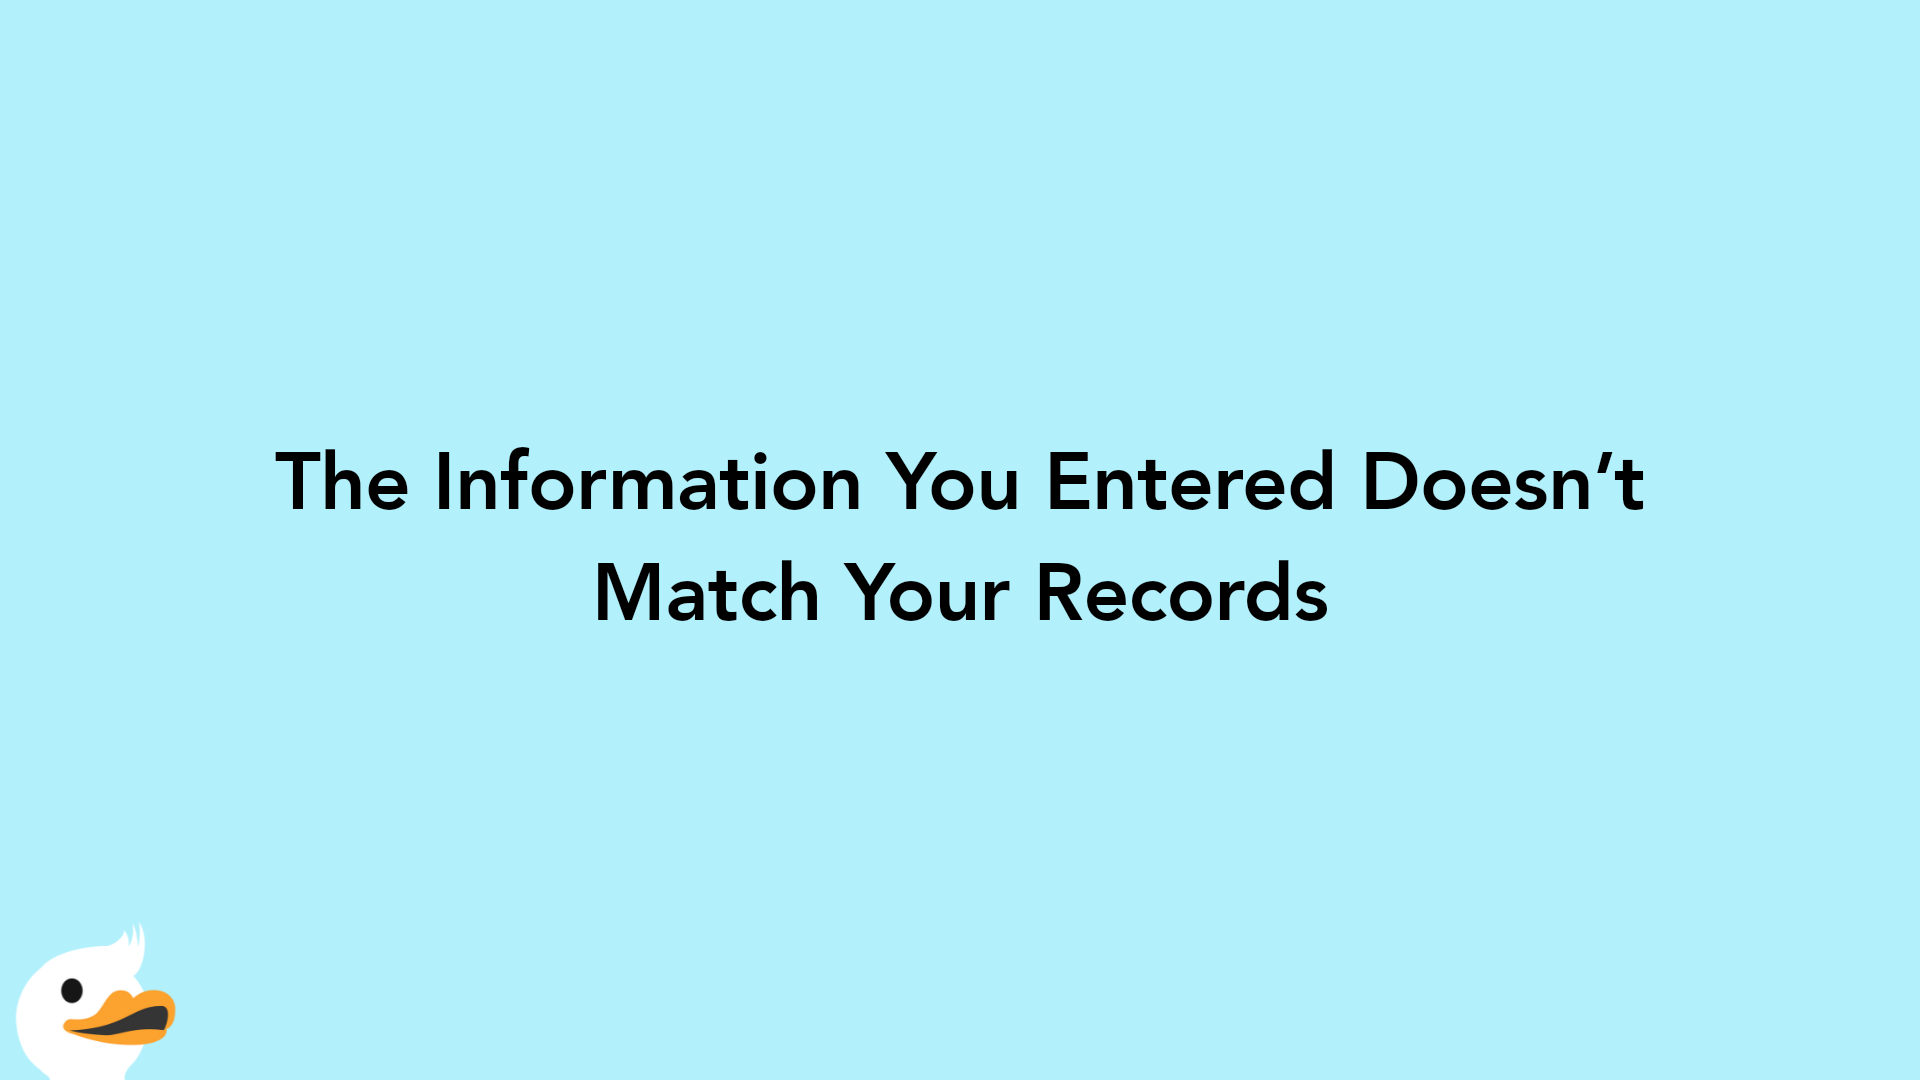 The Information You Entered Doesn’t Match Your Records